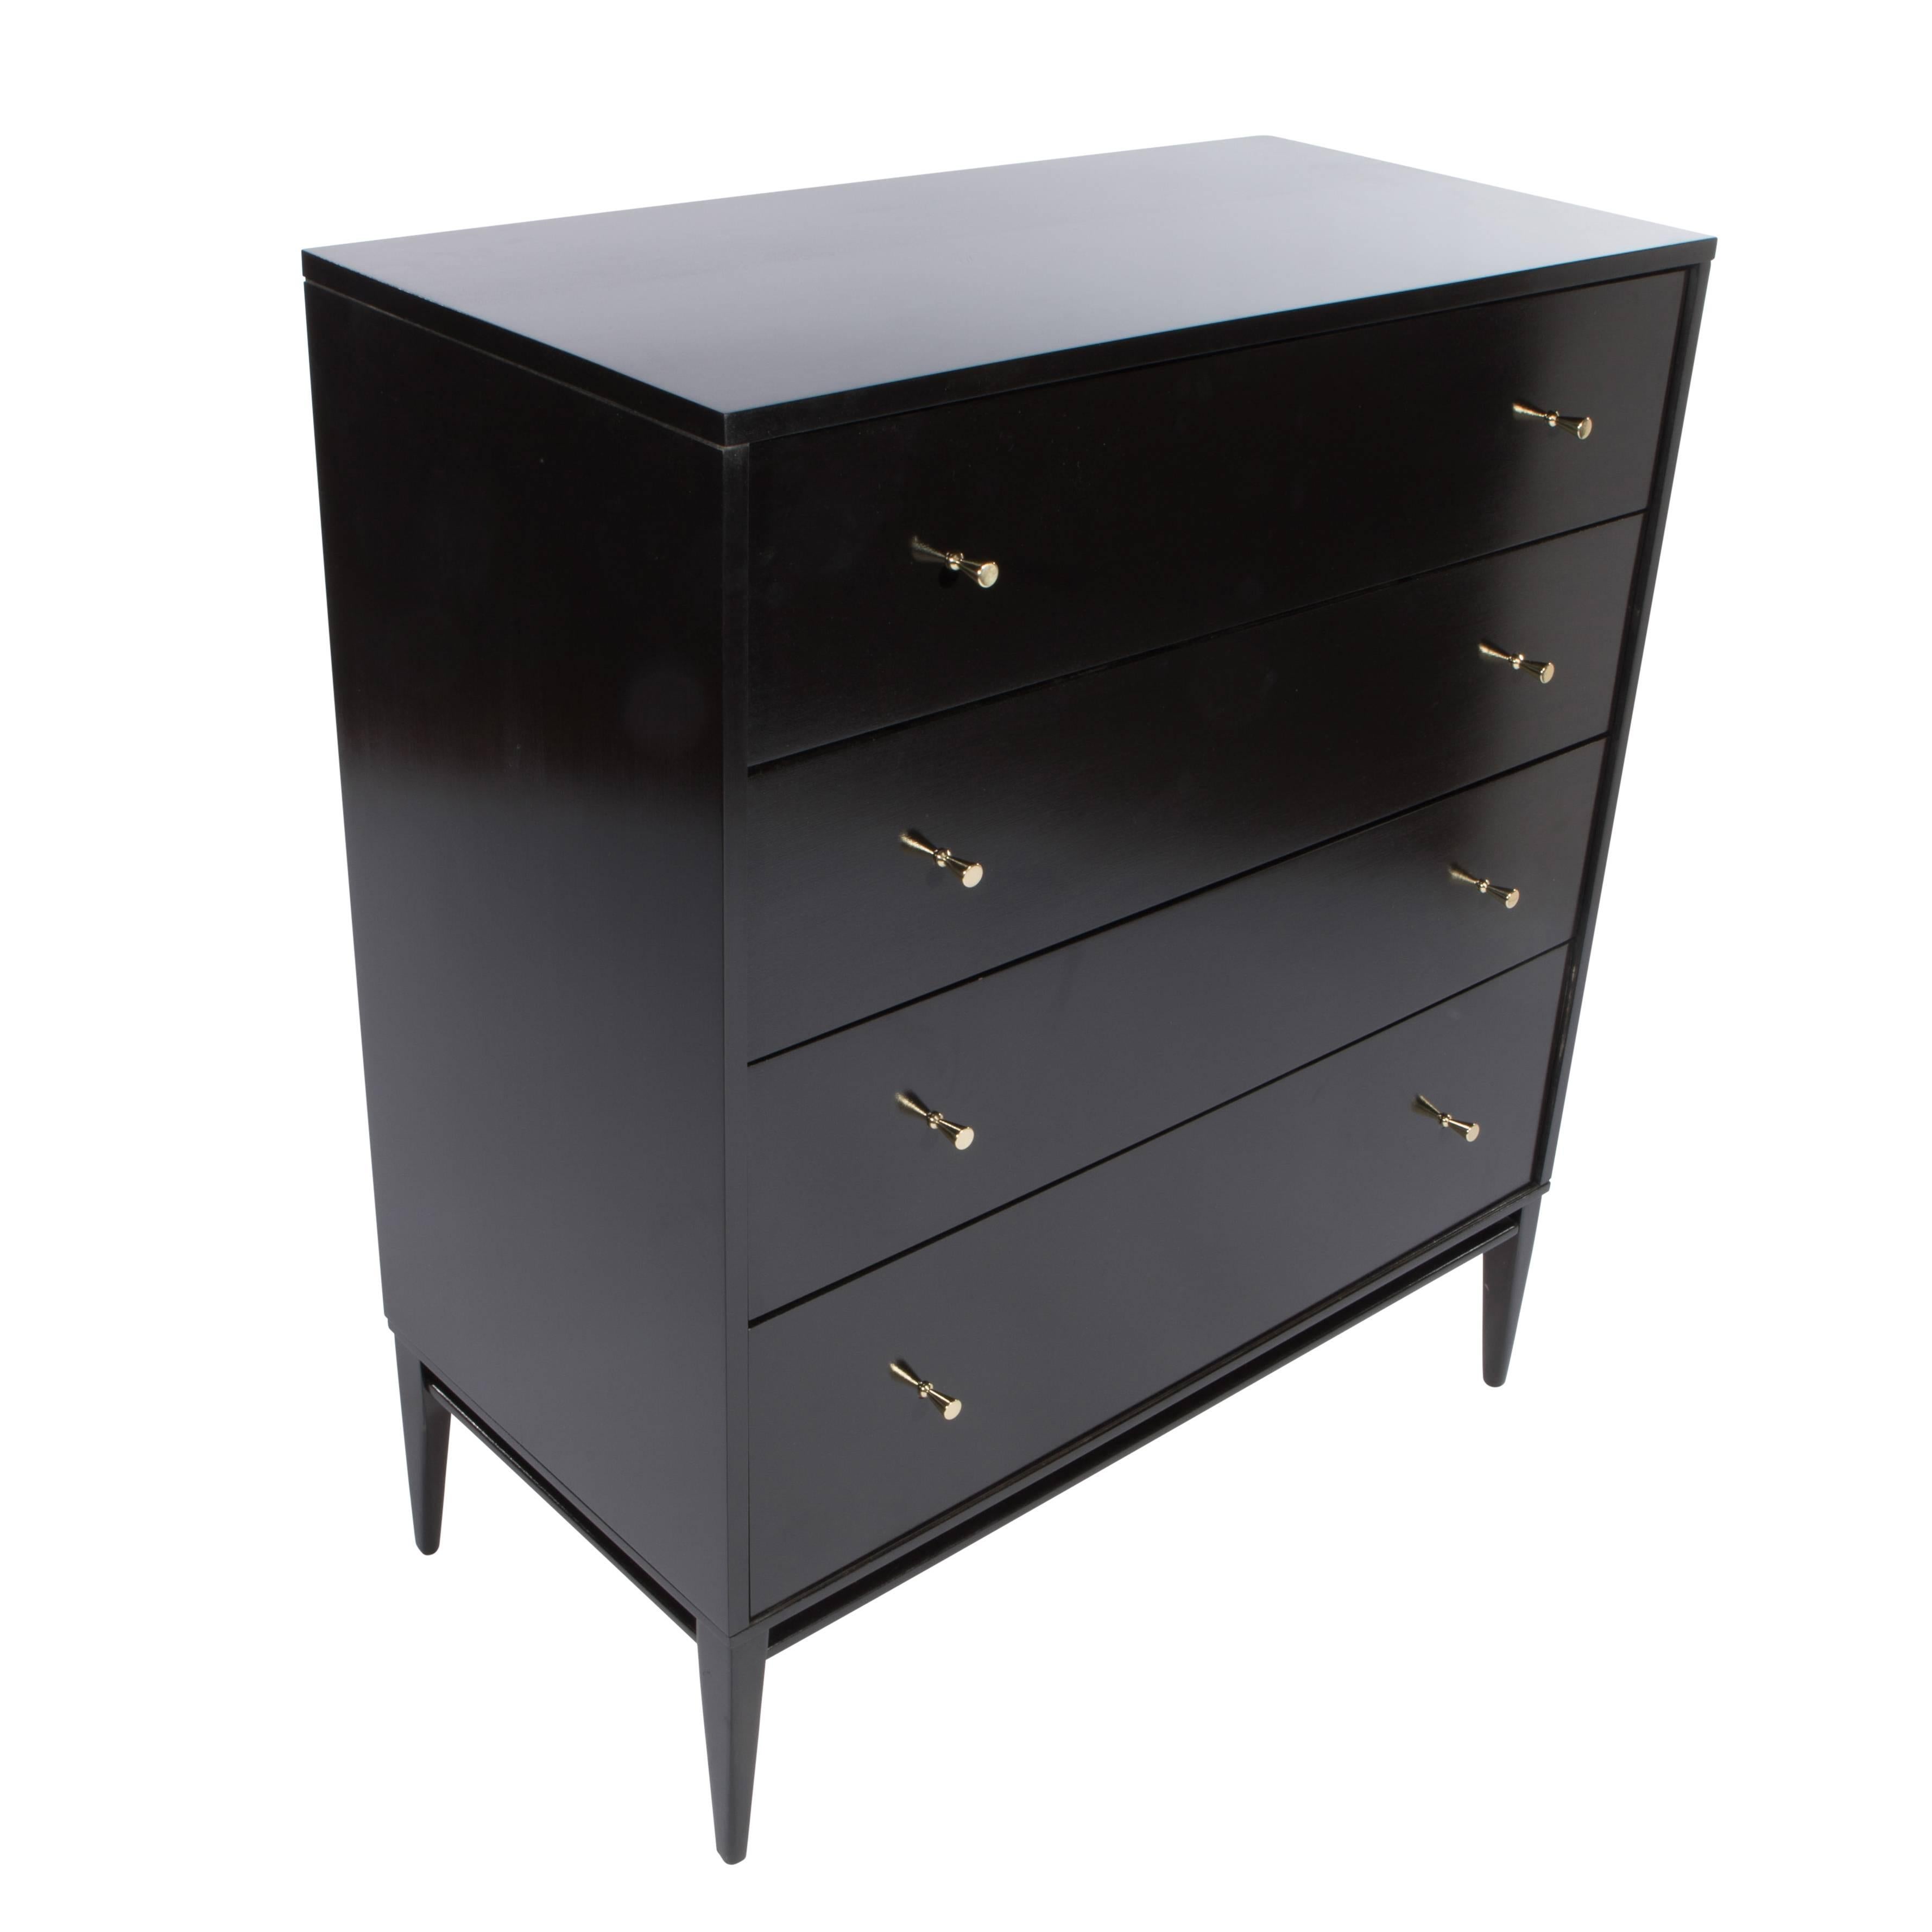 Four-drawer dresser supported by an elegantly tapered leg at each corner, part of Paul McCobb's Planner Group for Winchendon Furniture Co. The original conical brass pulls have been newly polished and lacquered. The maple has been restored with an